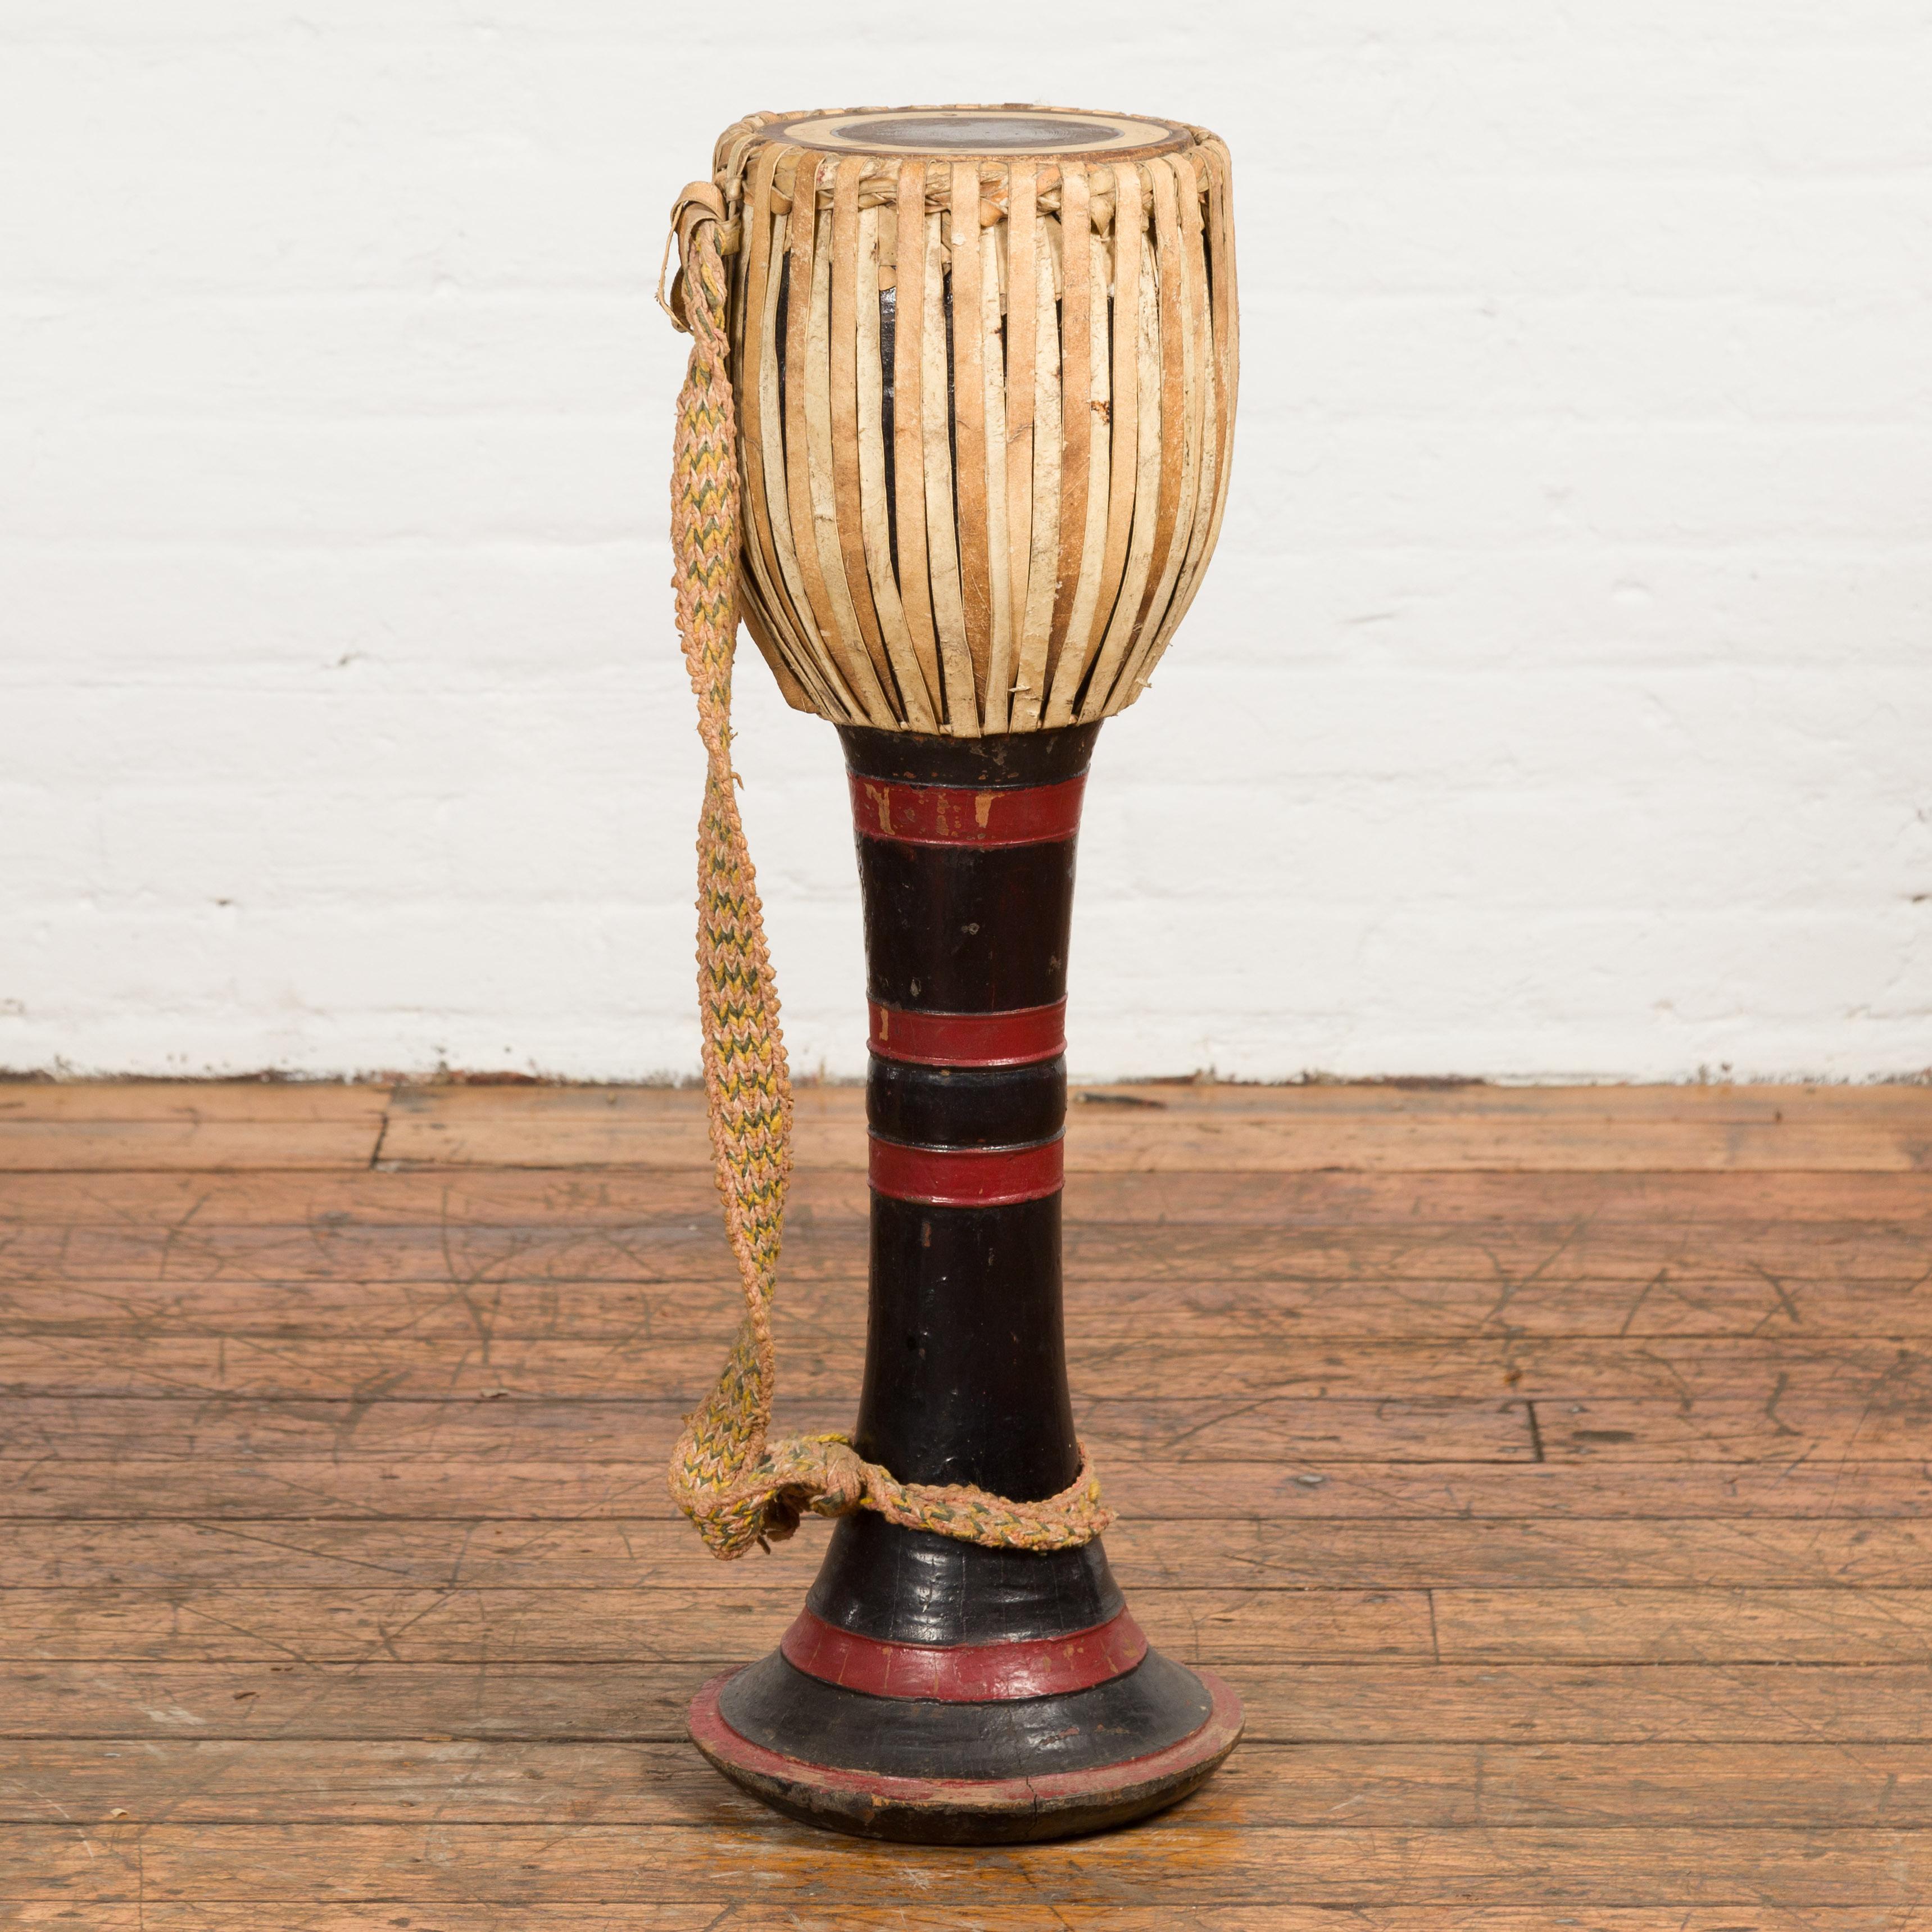 A Burmese tribal Ozi goblet shaped teak drum from the late 19th century, with red and black lacquer and calf skin top. Created in Burma during the later years of the 19th century, this tribal drum, called an Ozi drum, features a goblet shaped top